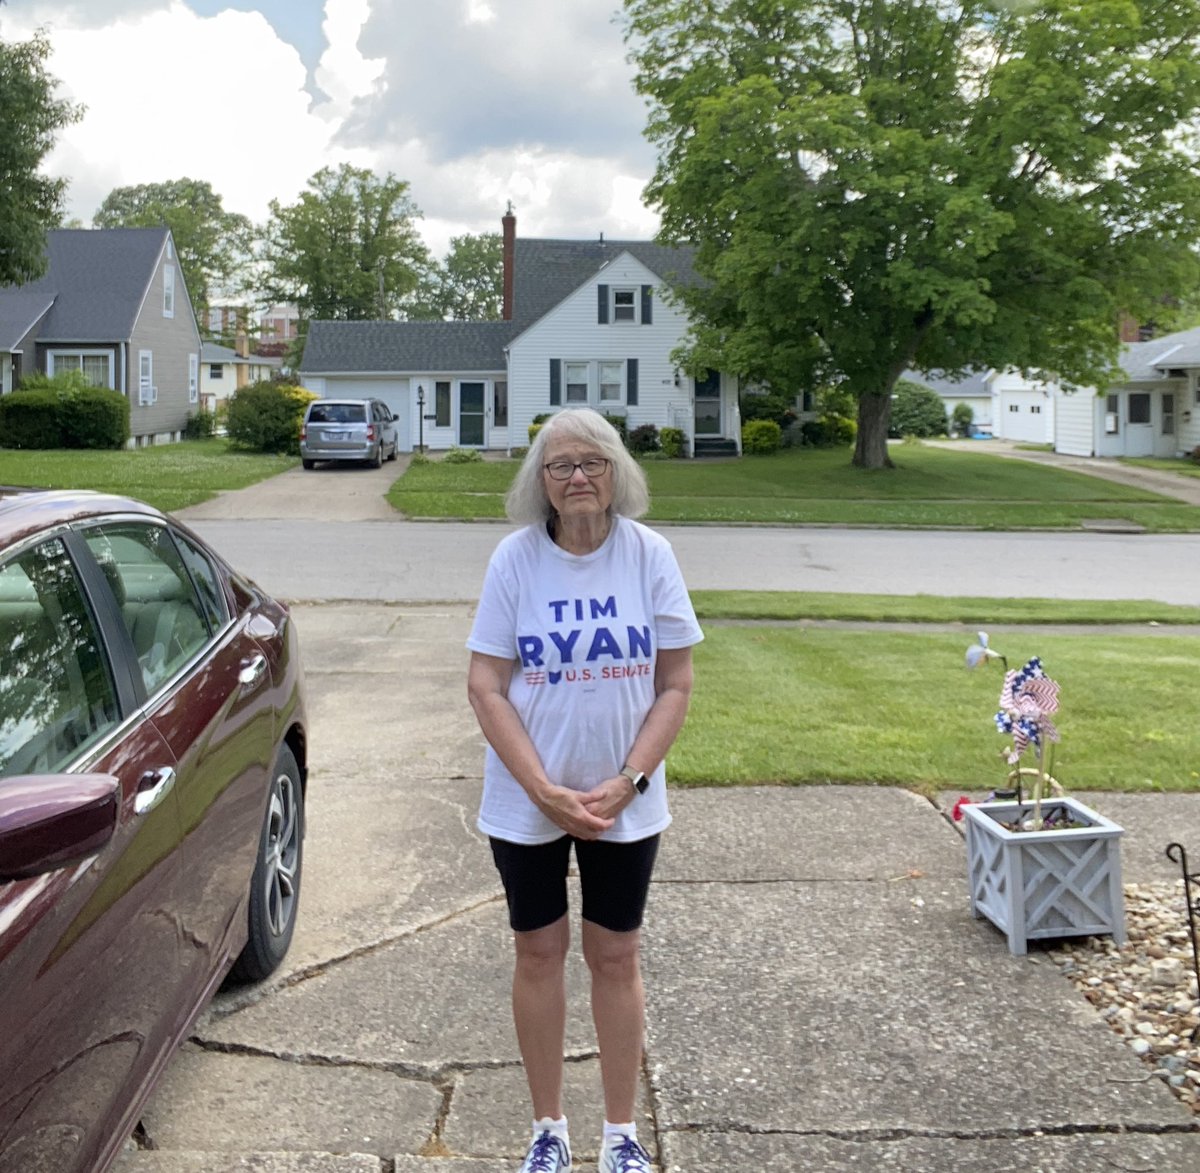 Just got done with 3 mile walk in the neighborhood !  Let my neighbors know who I am supporting for Senator for OHIO @TimRyan